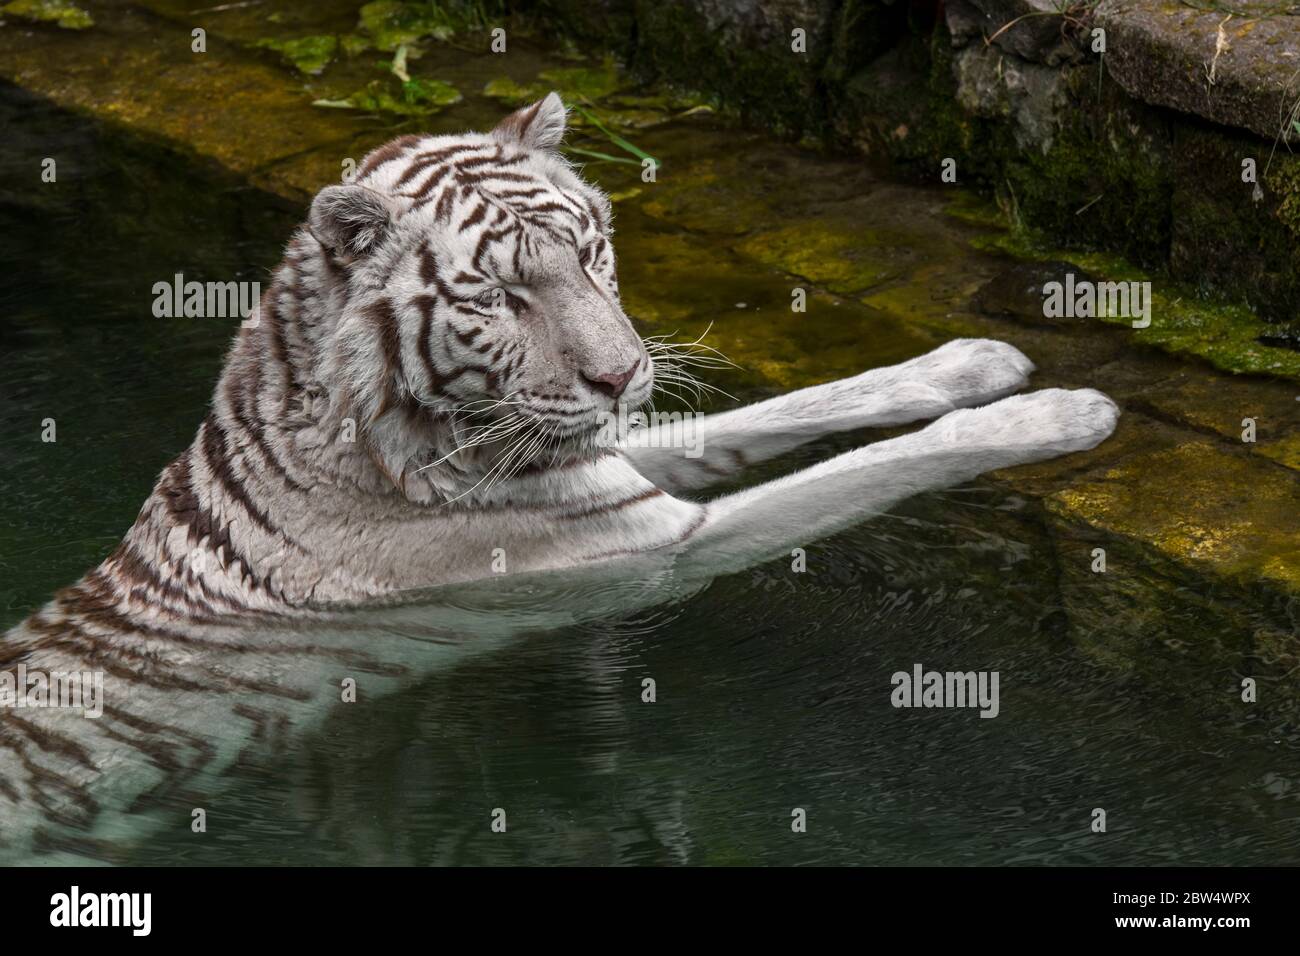 White tiger / bleached tiger (Panthera tigris) pigmentation variant of the Bengal tiger, cooling down in water of pond, native to India Stock Photo